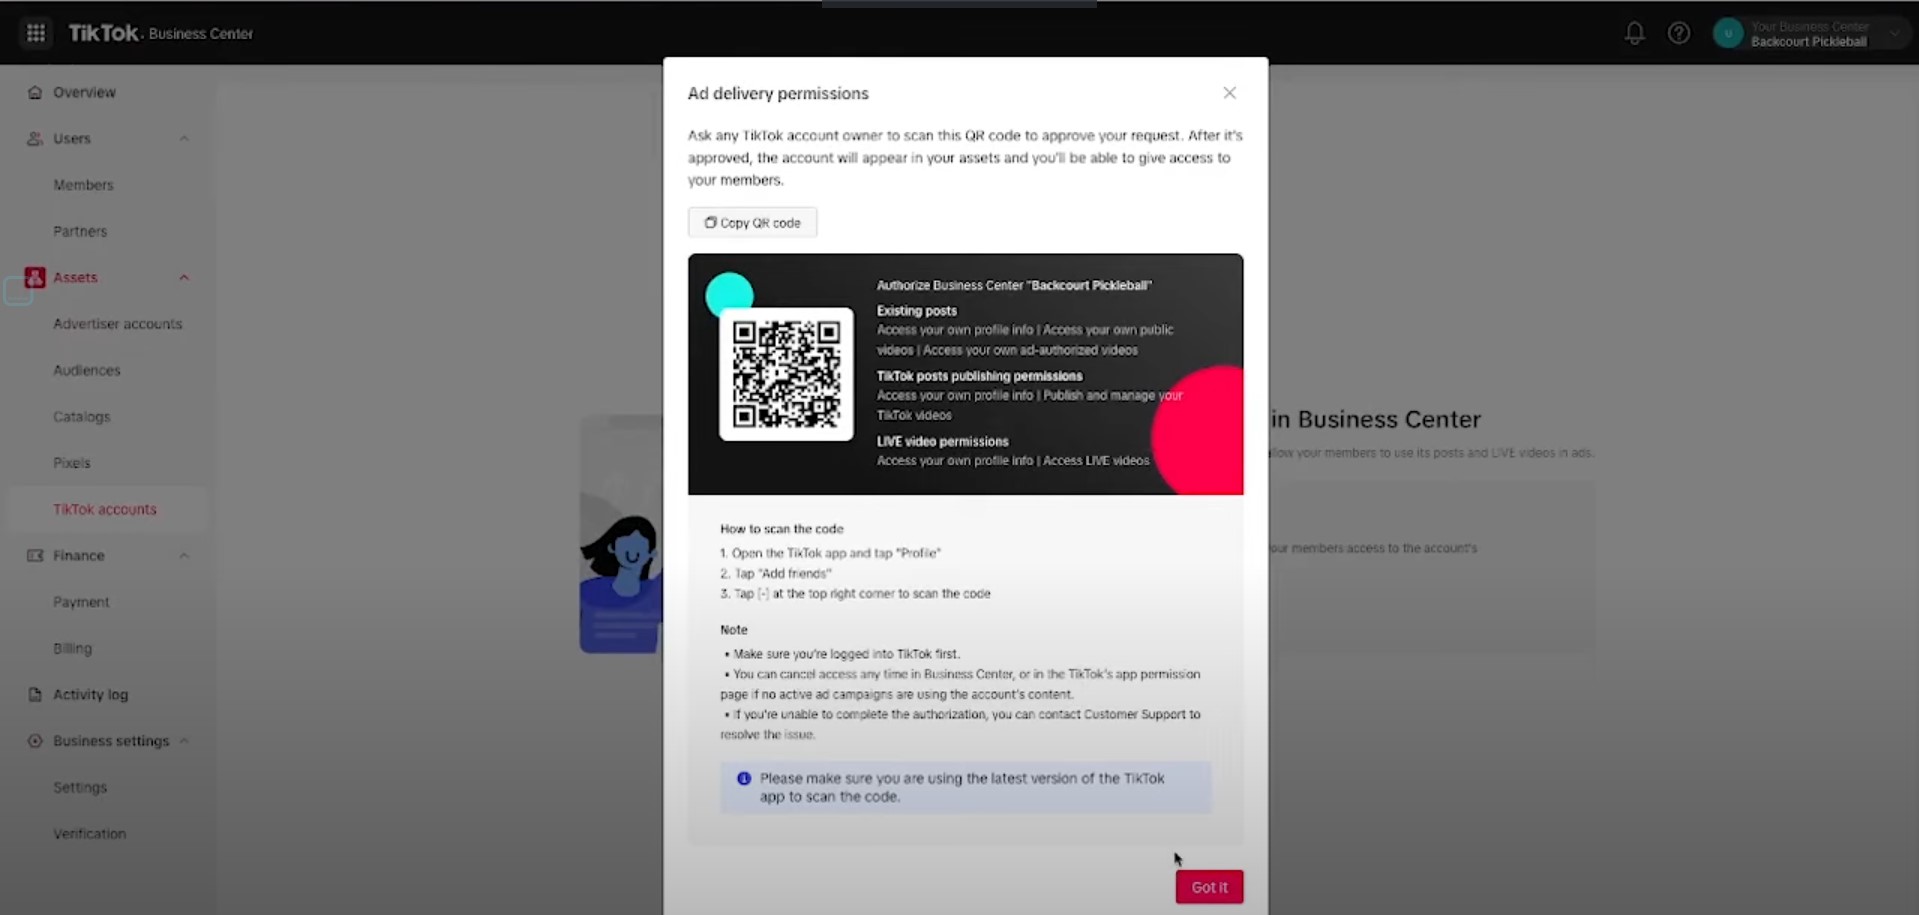 Ad delivery permissions with the QR code